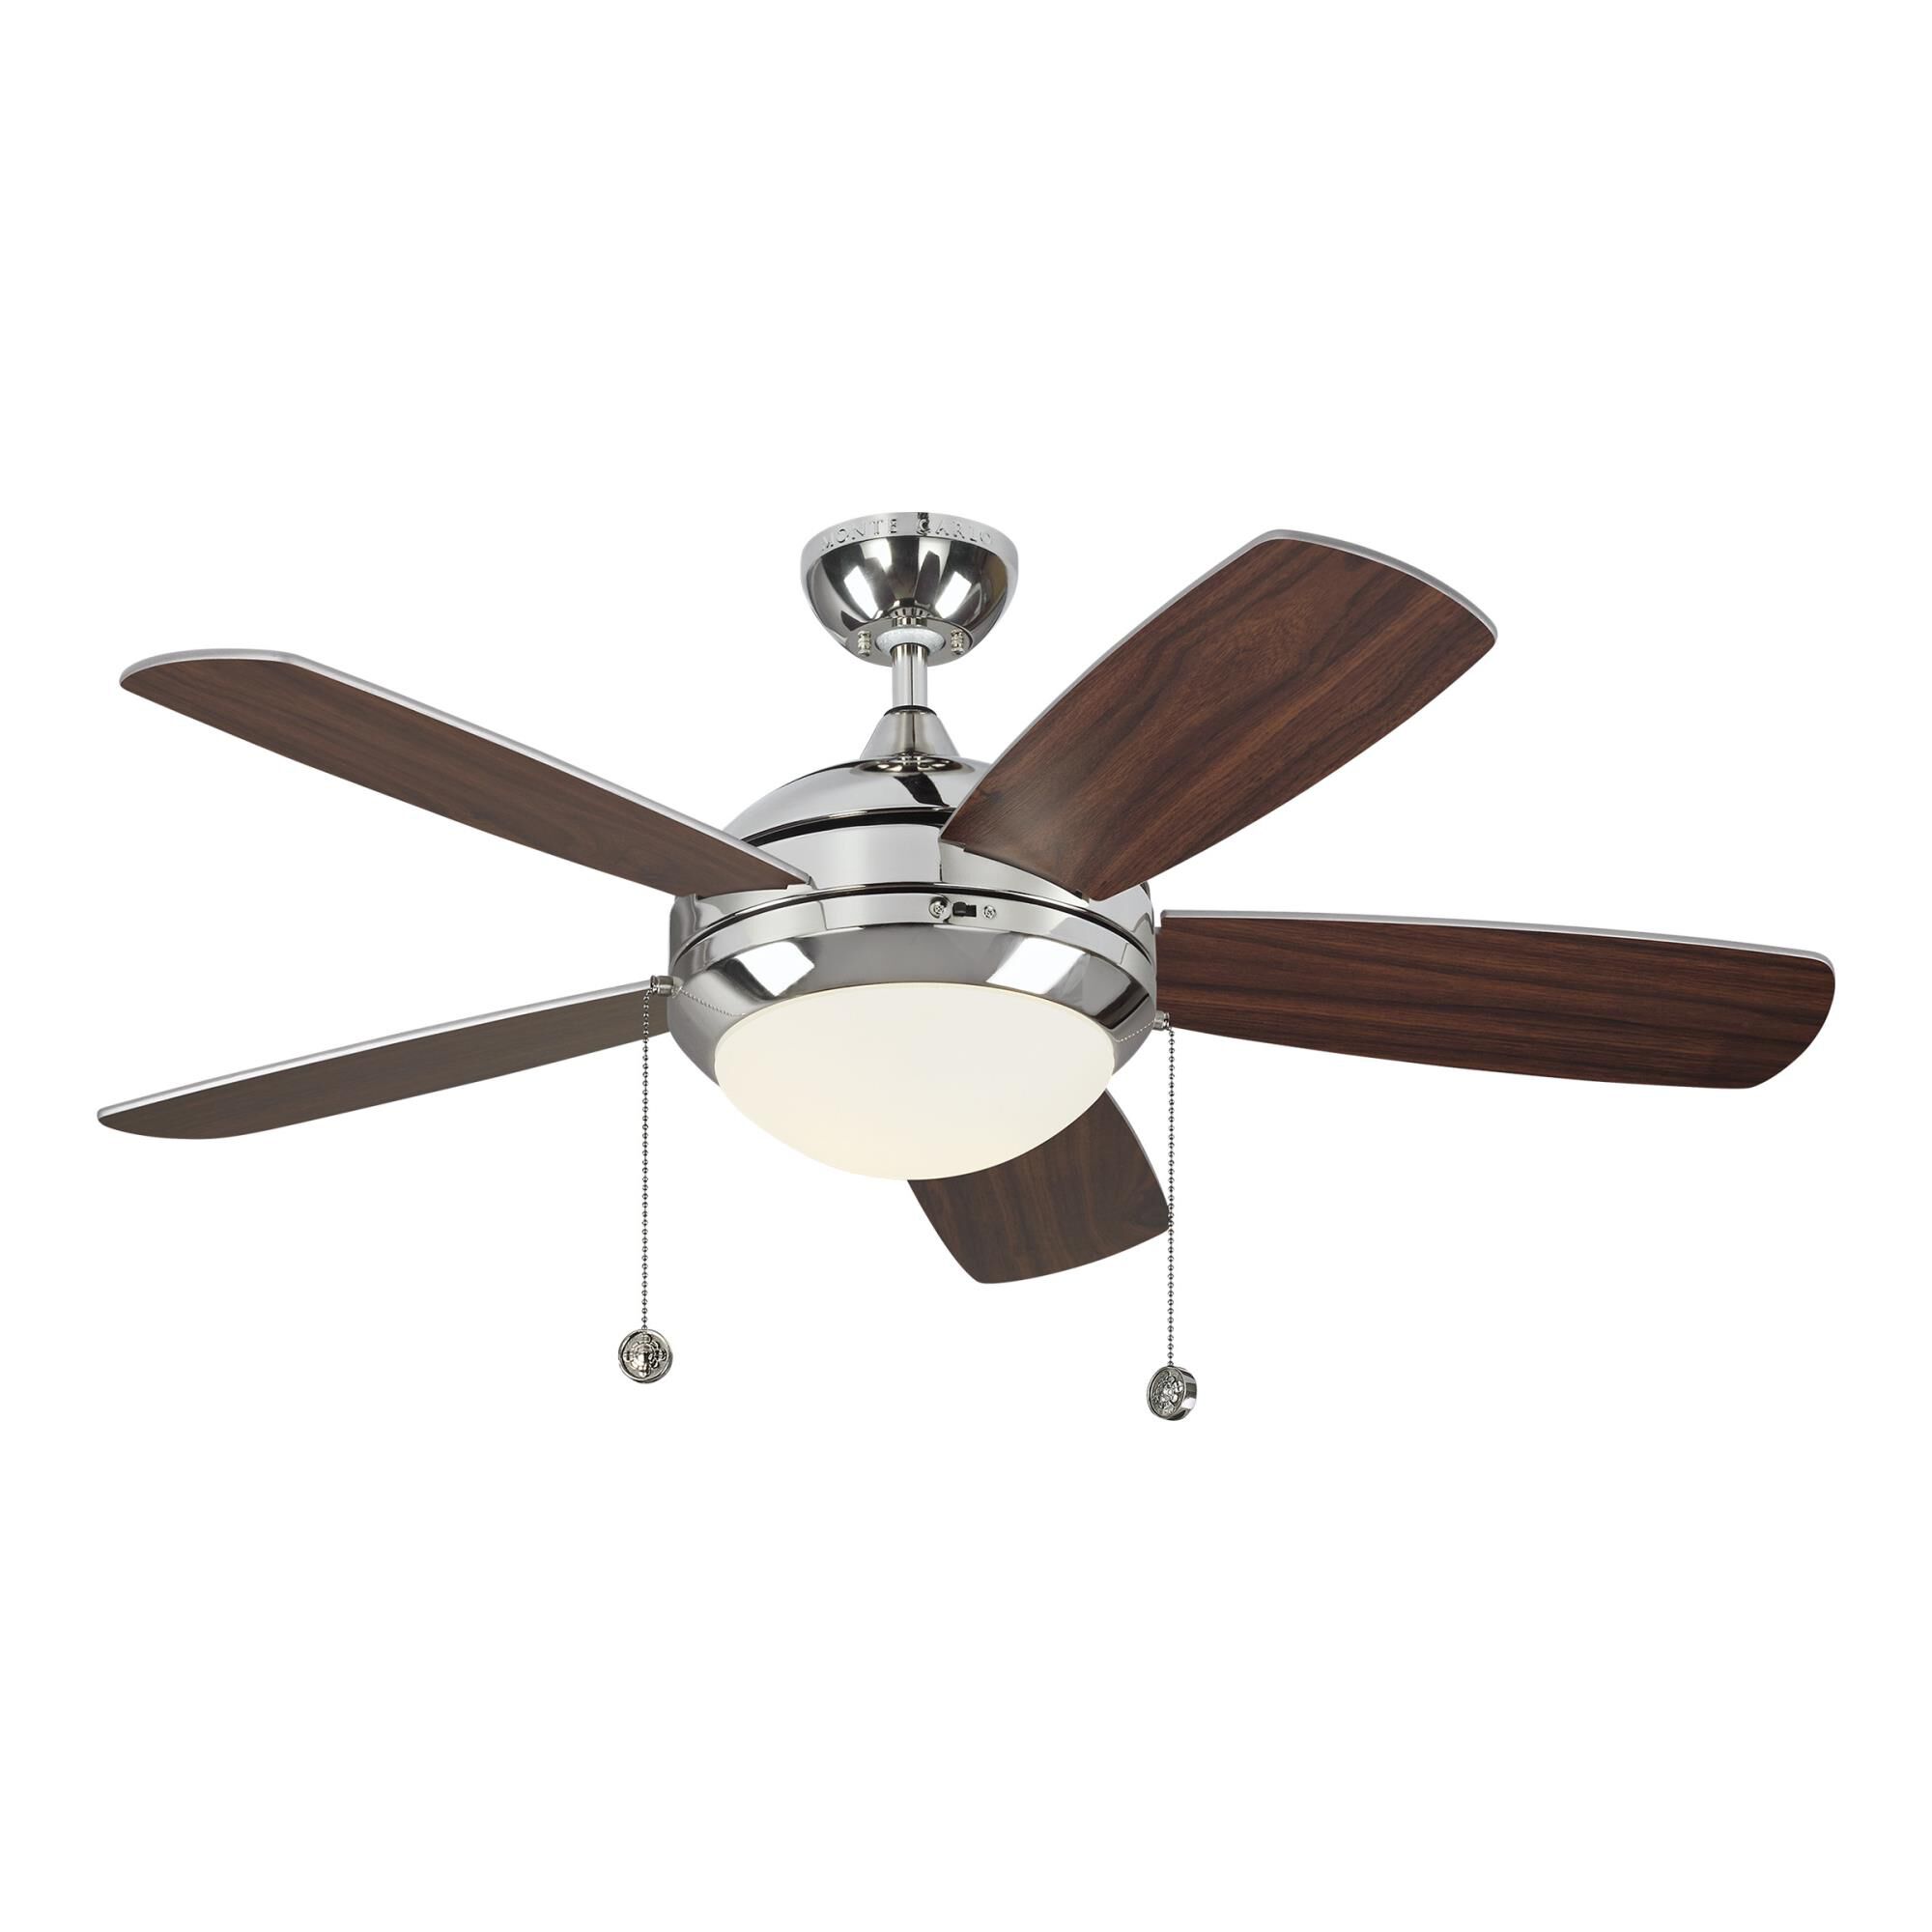 Photos - Fan Generation Lighting Discus Classic Ii 44 Inch Ceiling  with Light Kit D